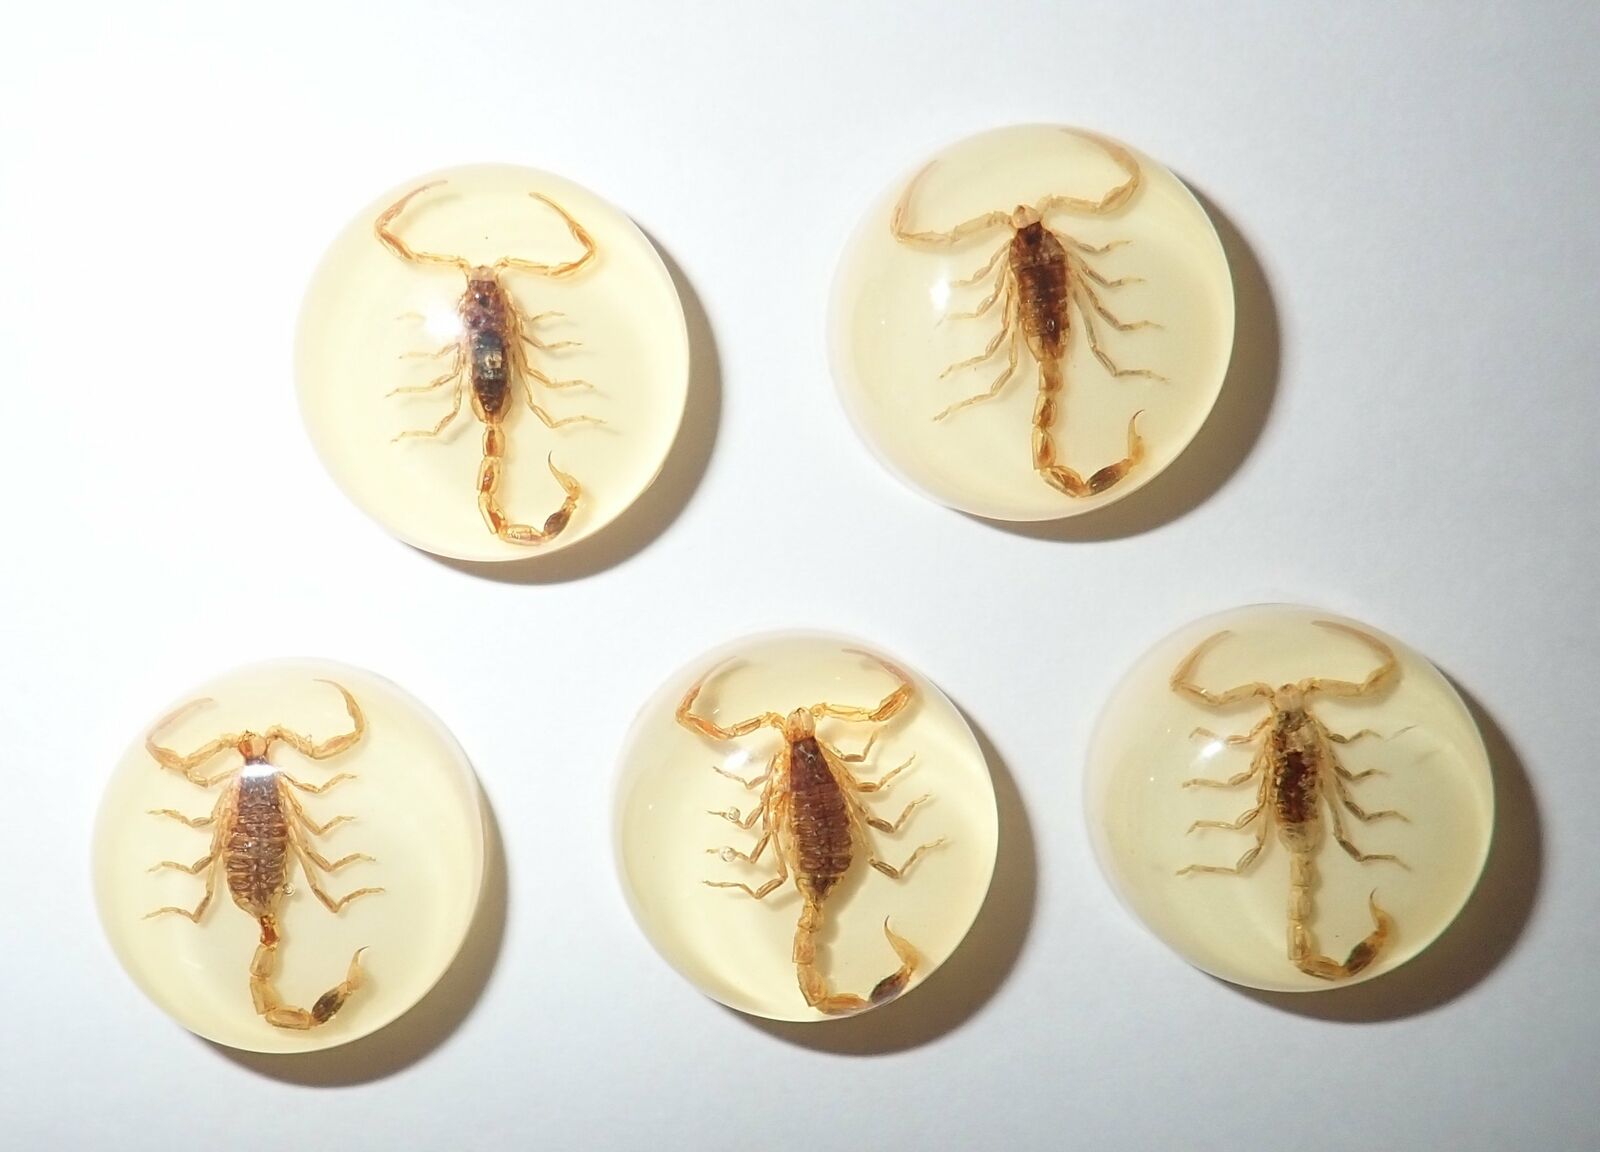 Insect Cabochon Golden Scorpion Specimen Round 19 mm on Amber White 5 pieces Lot